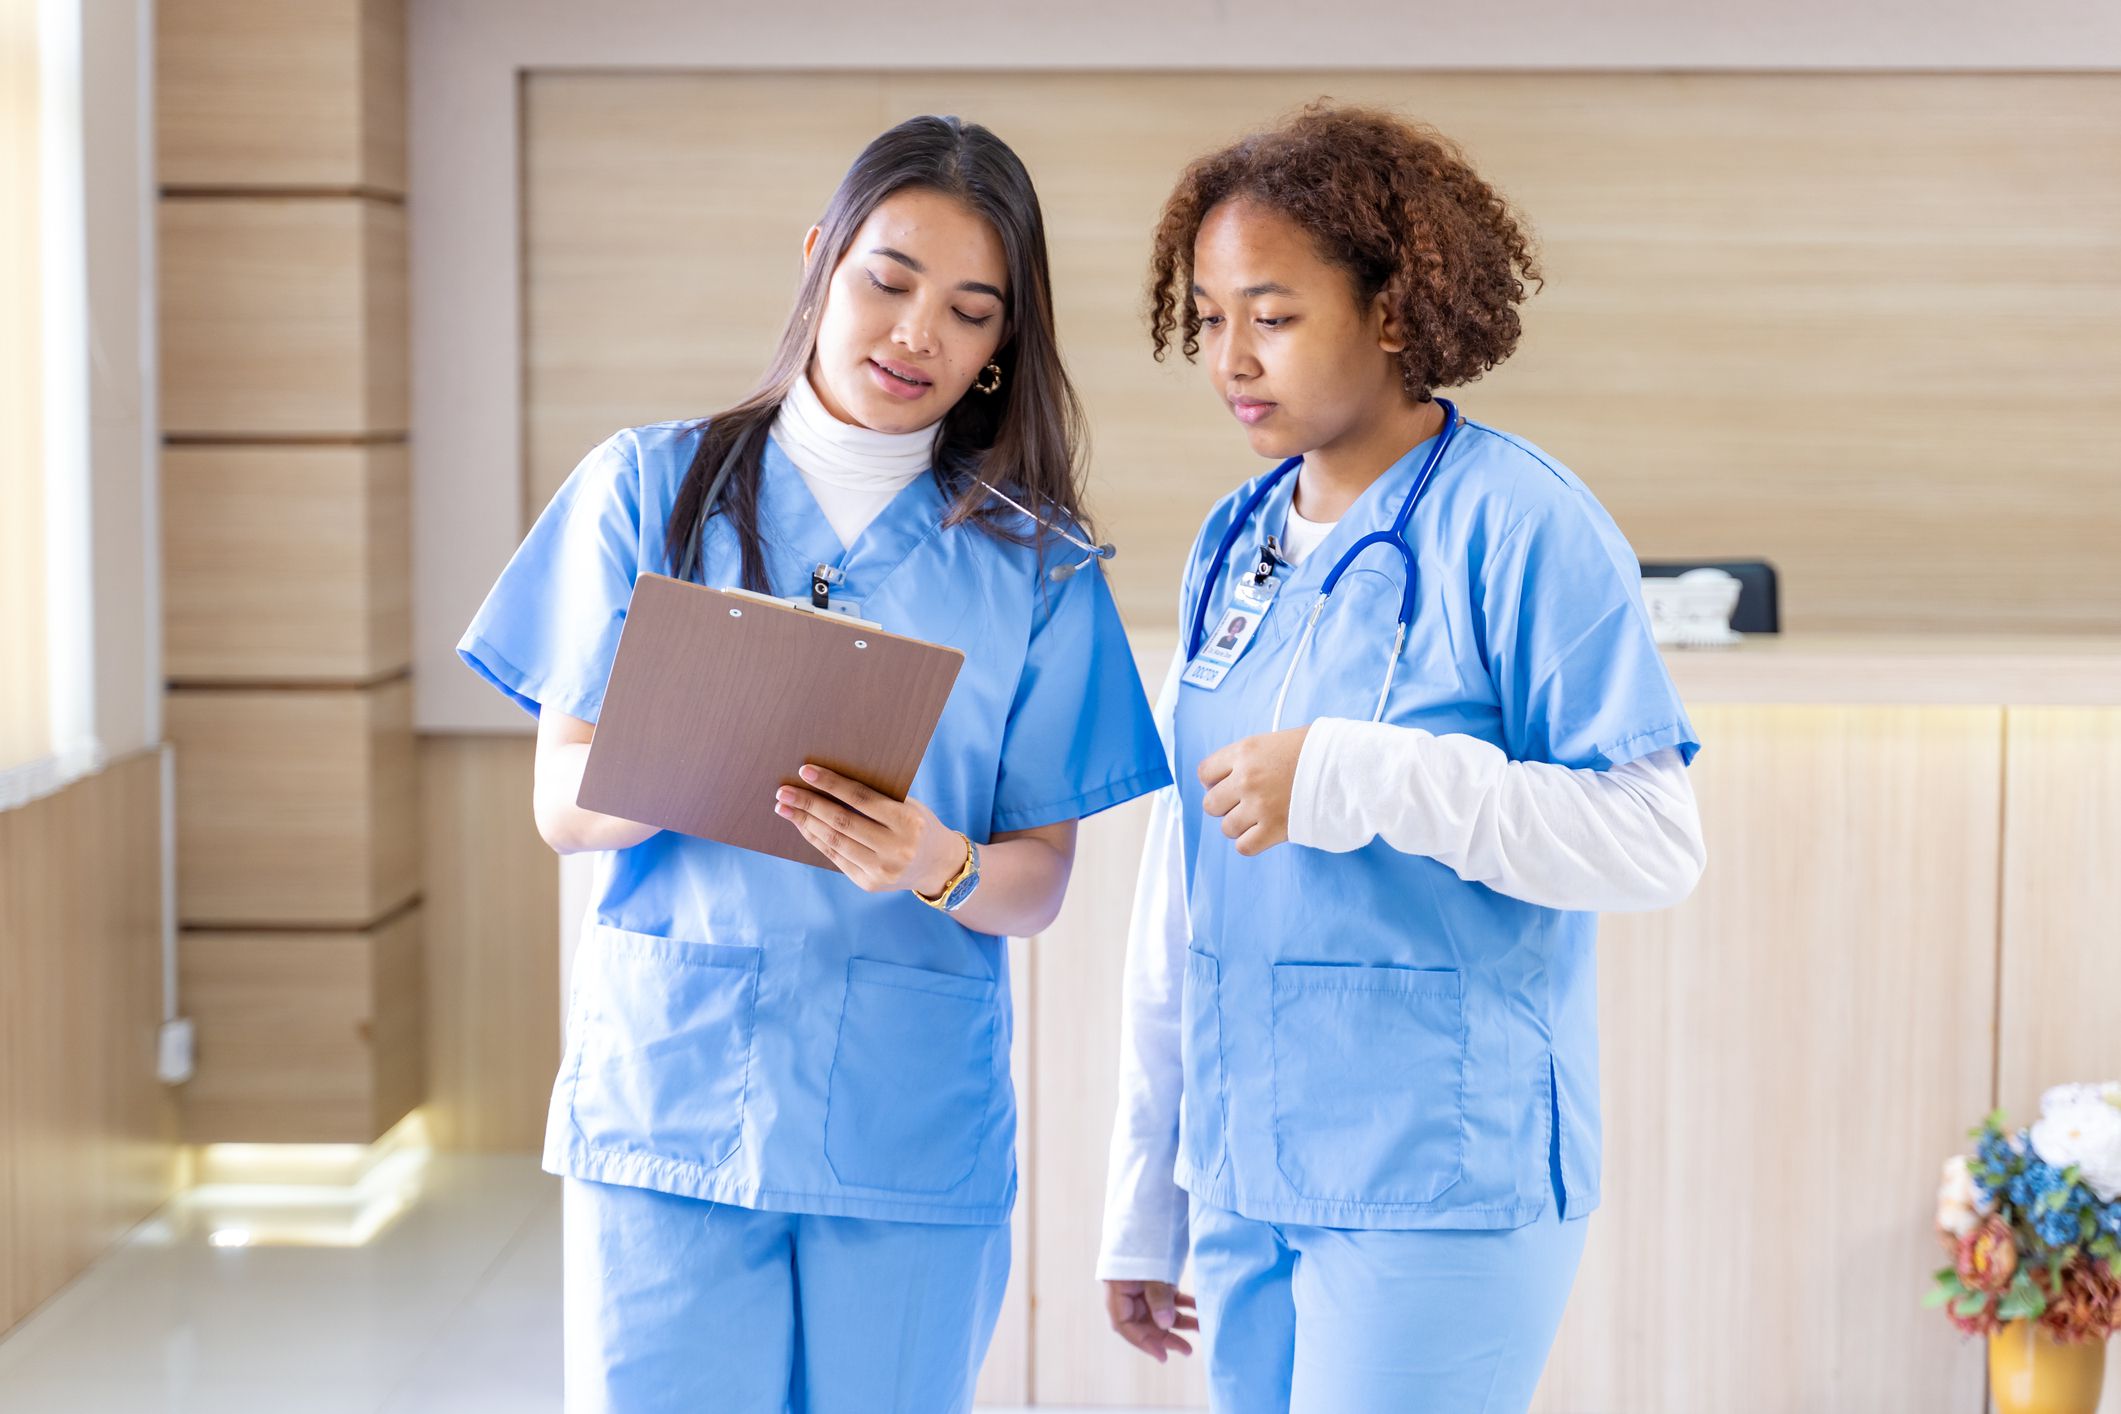 <p>Median Pay: $81,220 per year</p><p>Job Growth Outlook: 6%</p><p>Job Description: Provide patient care.</p><p>Requirements: Bachelor’s degree and professional licensing</p><p>Duties:</p><ul><li>Provide care in hospitals, physicians’ offices, home healthcare settings, and nursing care facilities</li><li>Communicate with patients about their needs</li><li>Educate patients and the public about health conditions</li></ul>